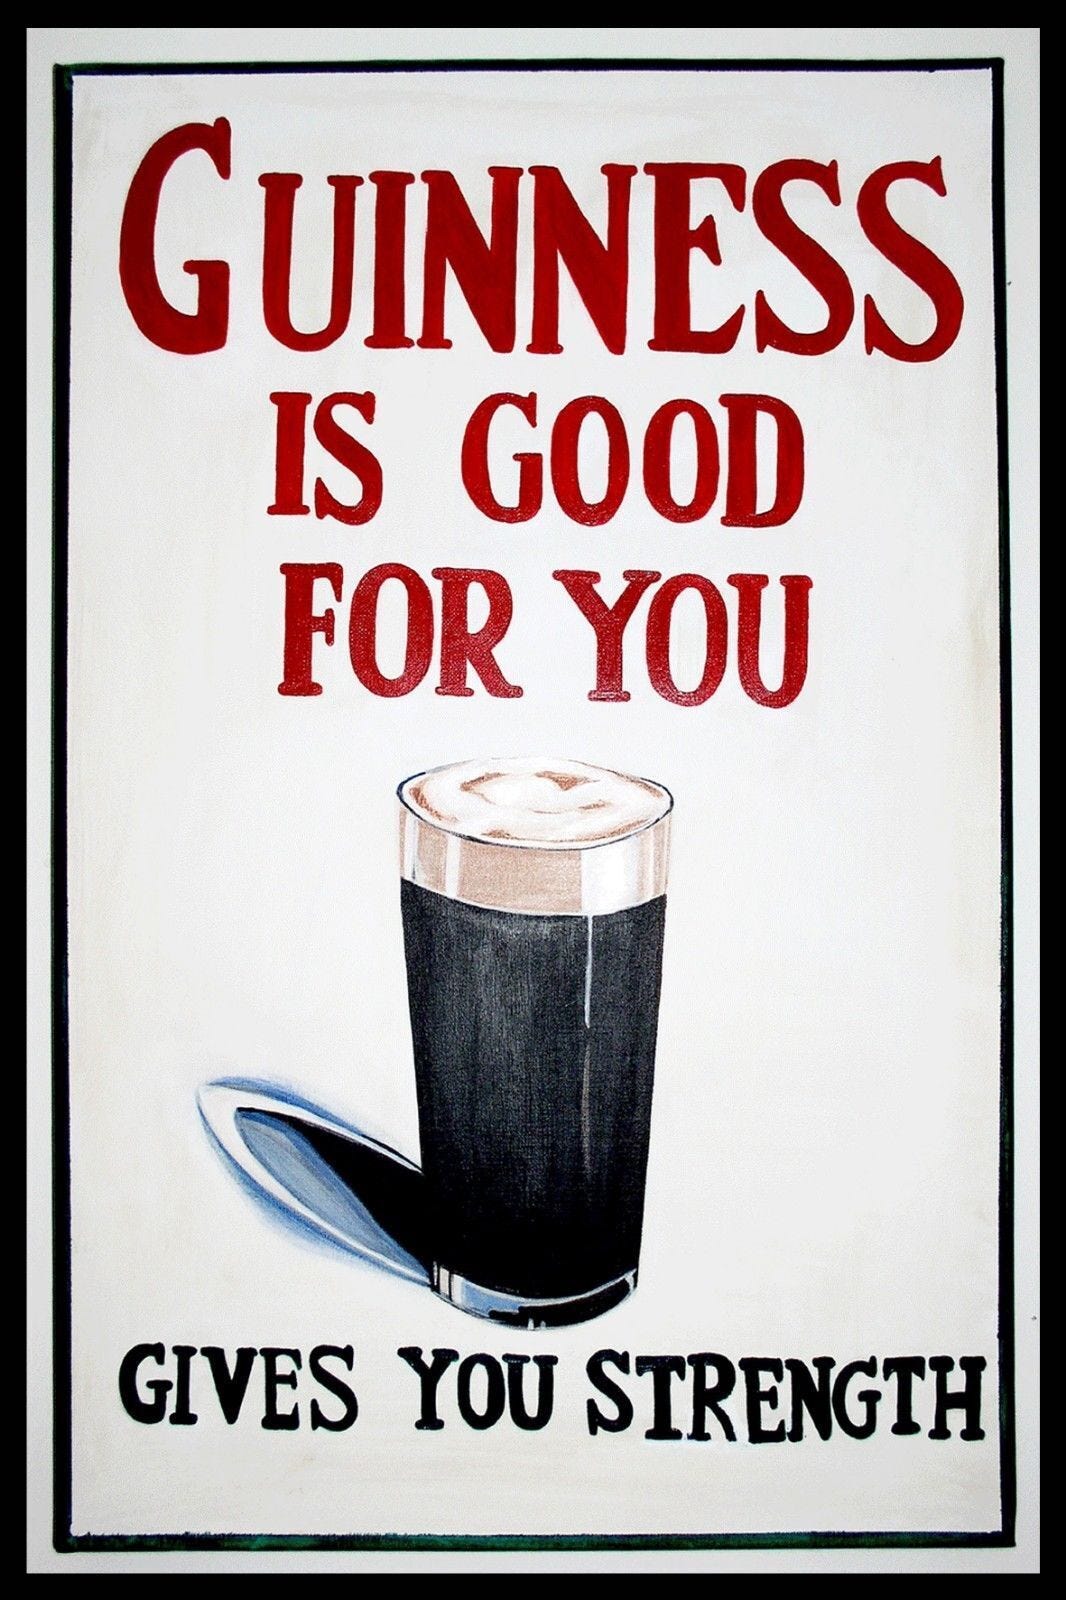 Guinness is good for you advert Vintage Retro style Metal Sign, man cave,  bar